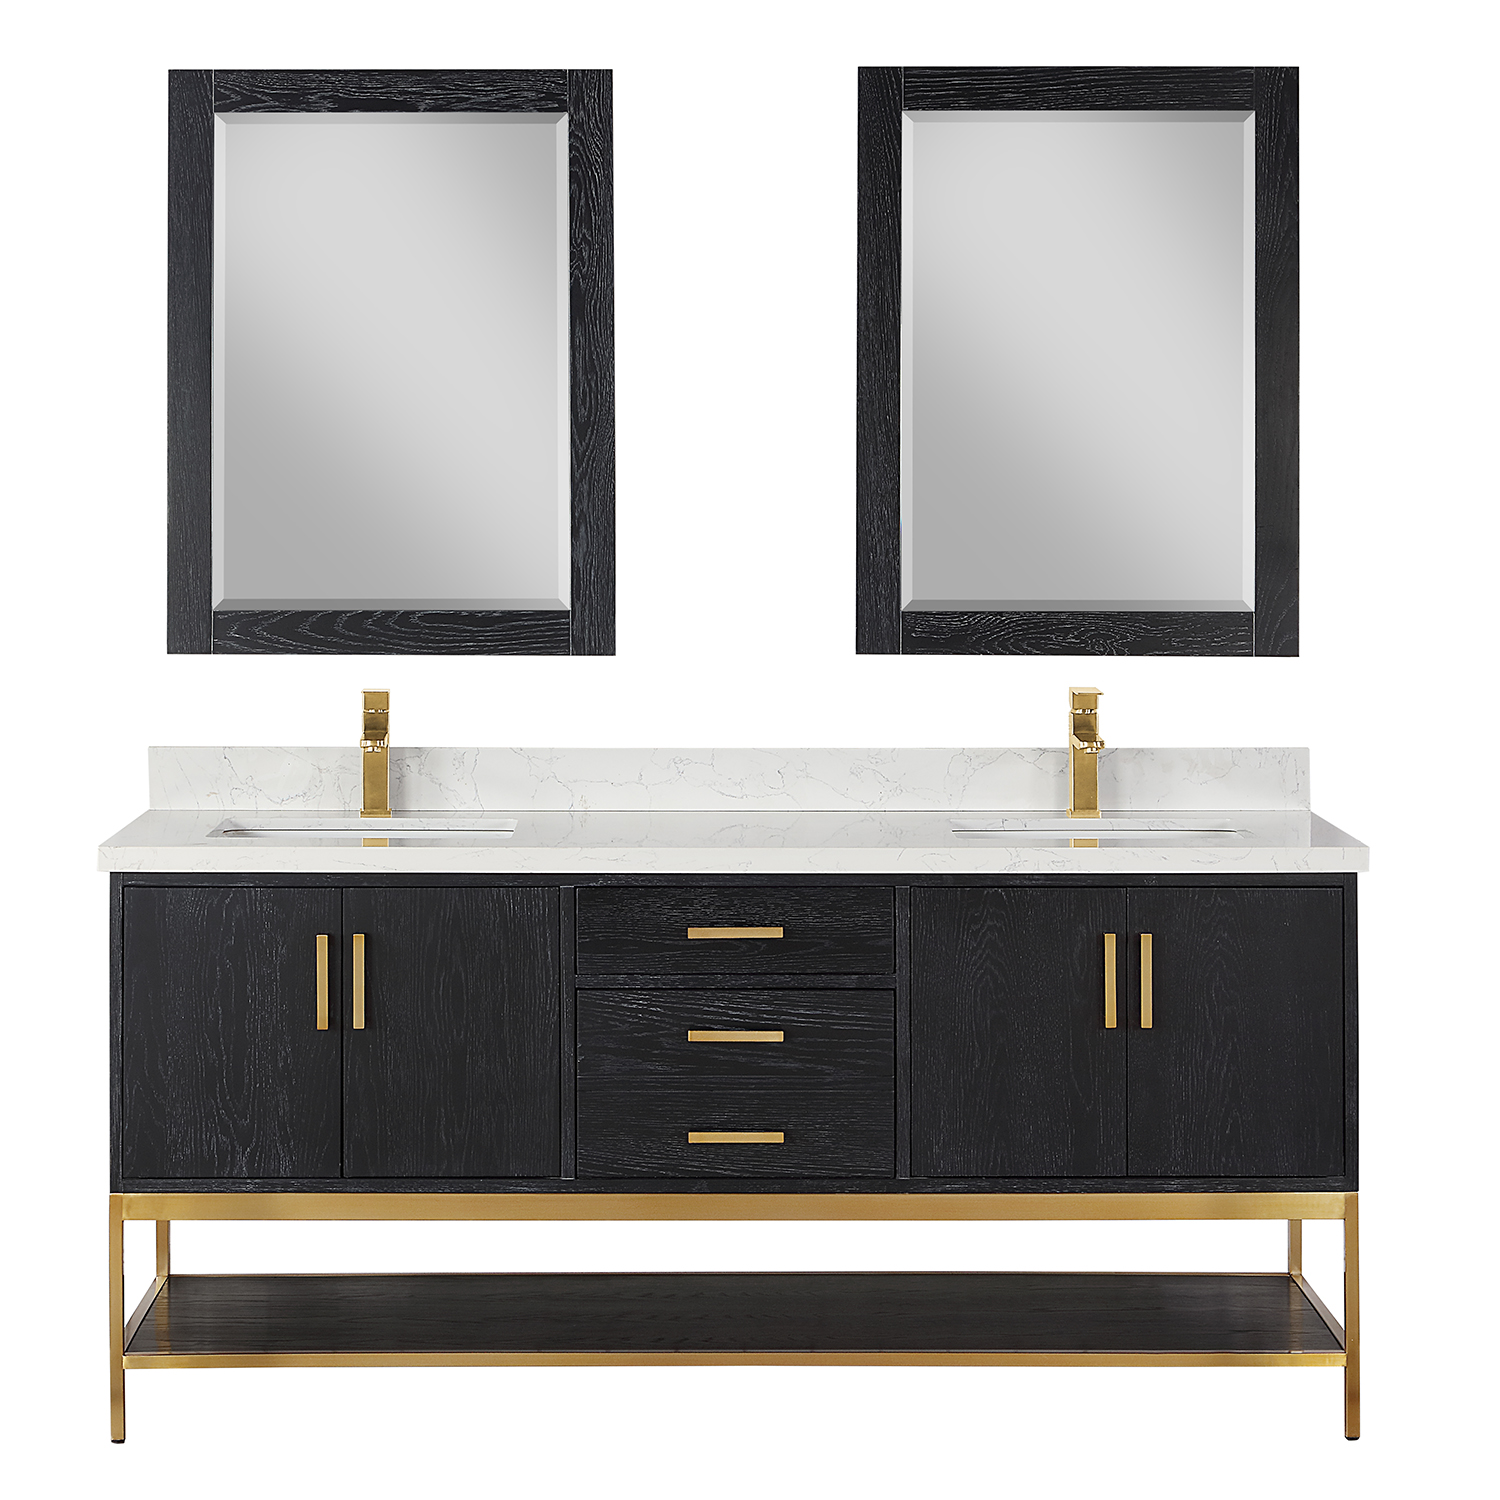 Issac Edwards Collection 72" Double Bathroom Vanity Set in Black Oak with Grain White Composite Stone Countertop without Mirror 